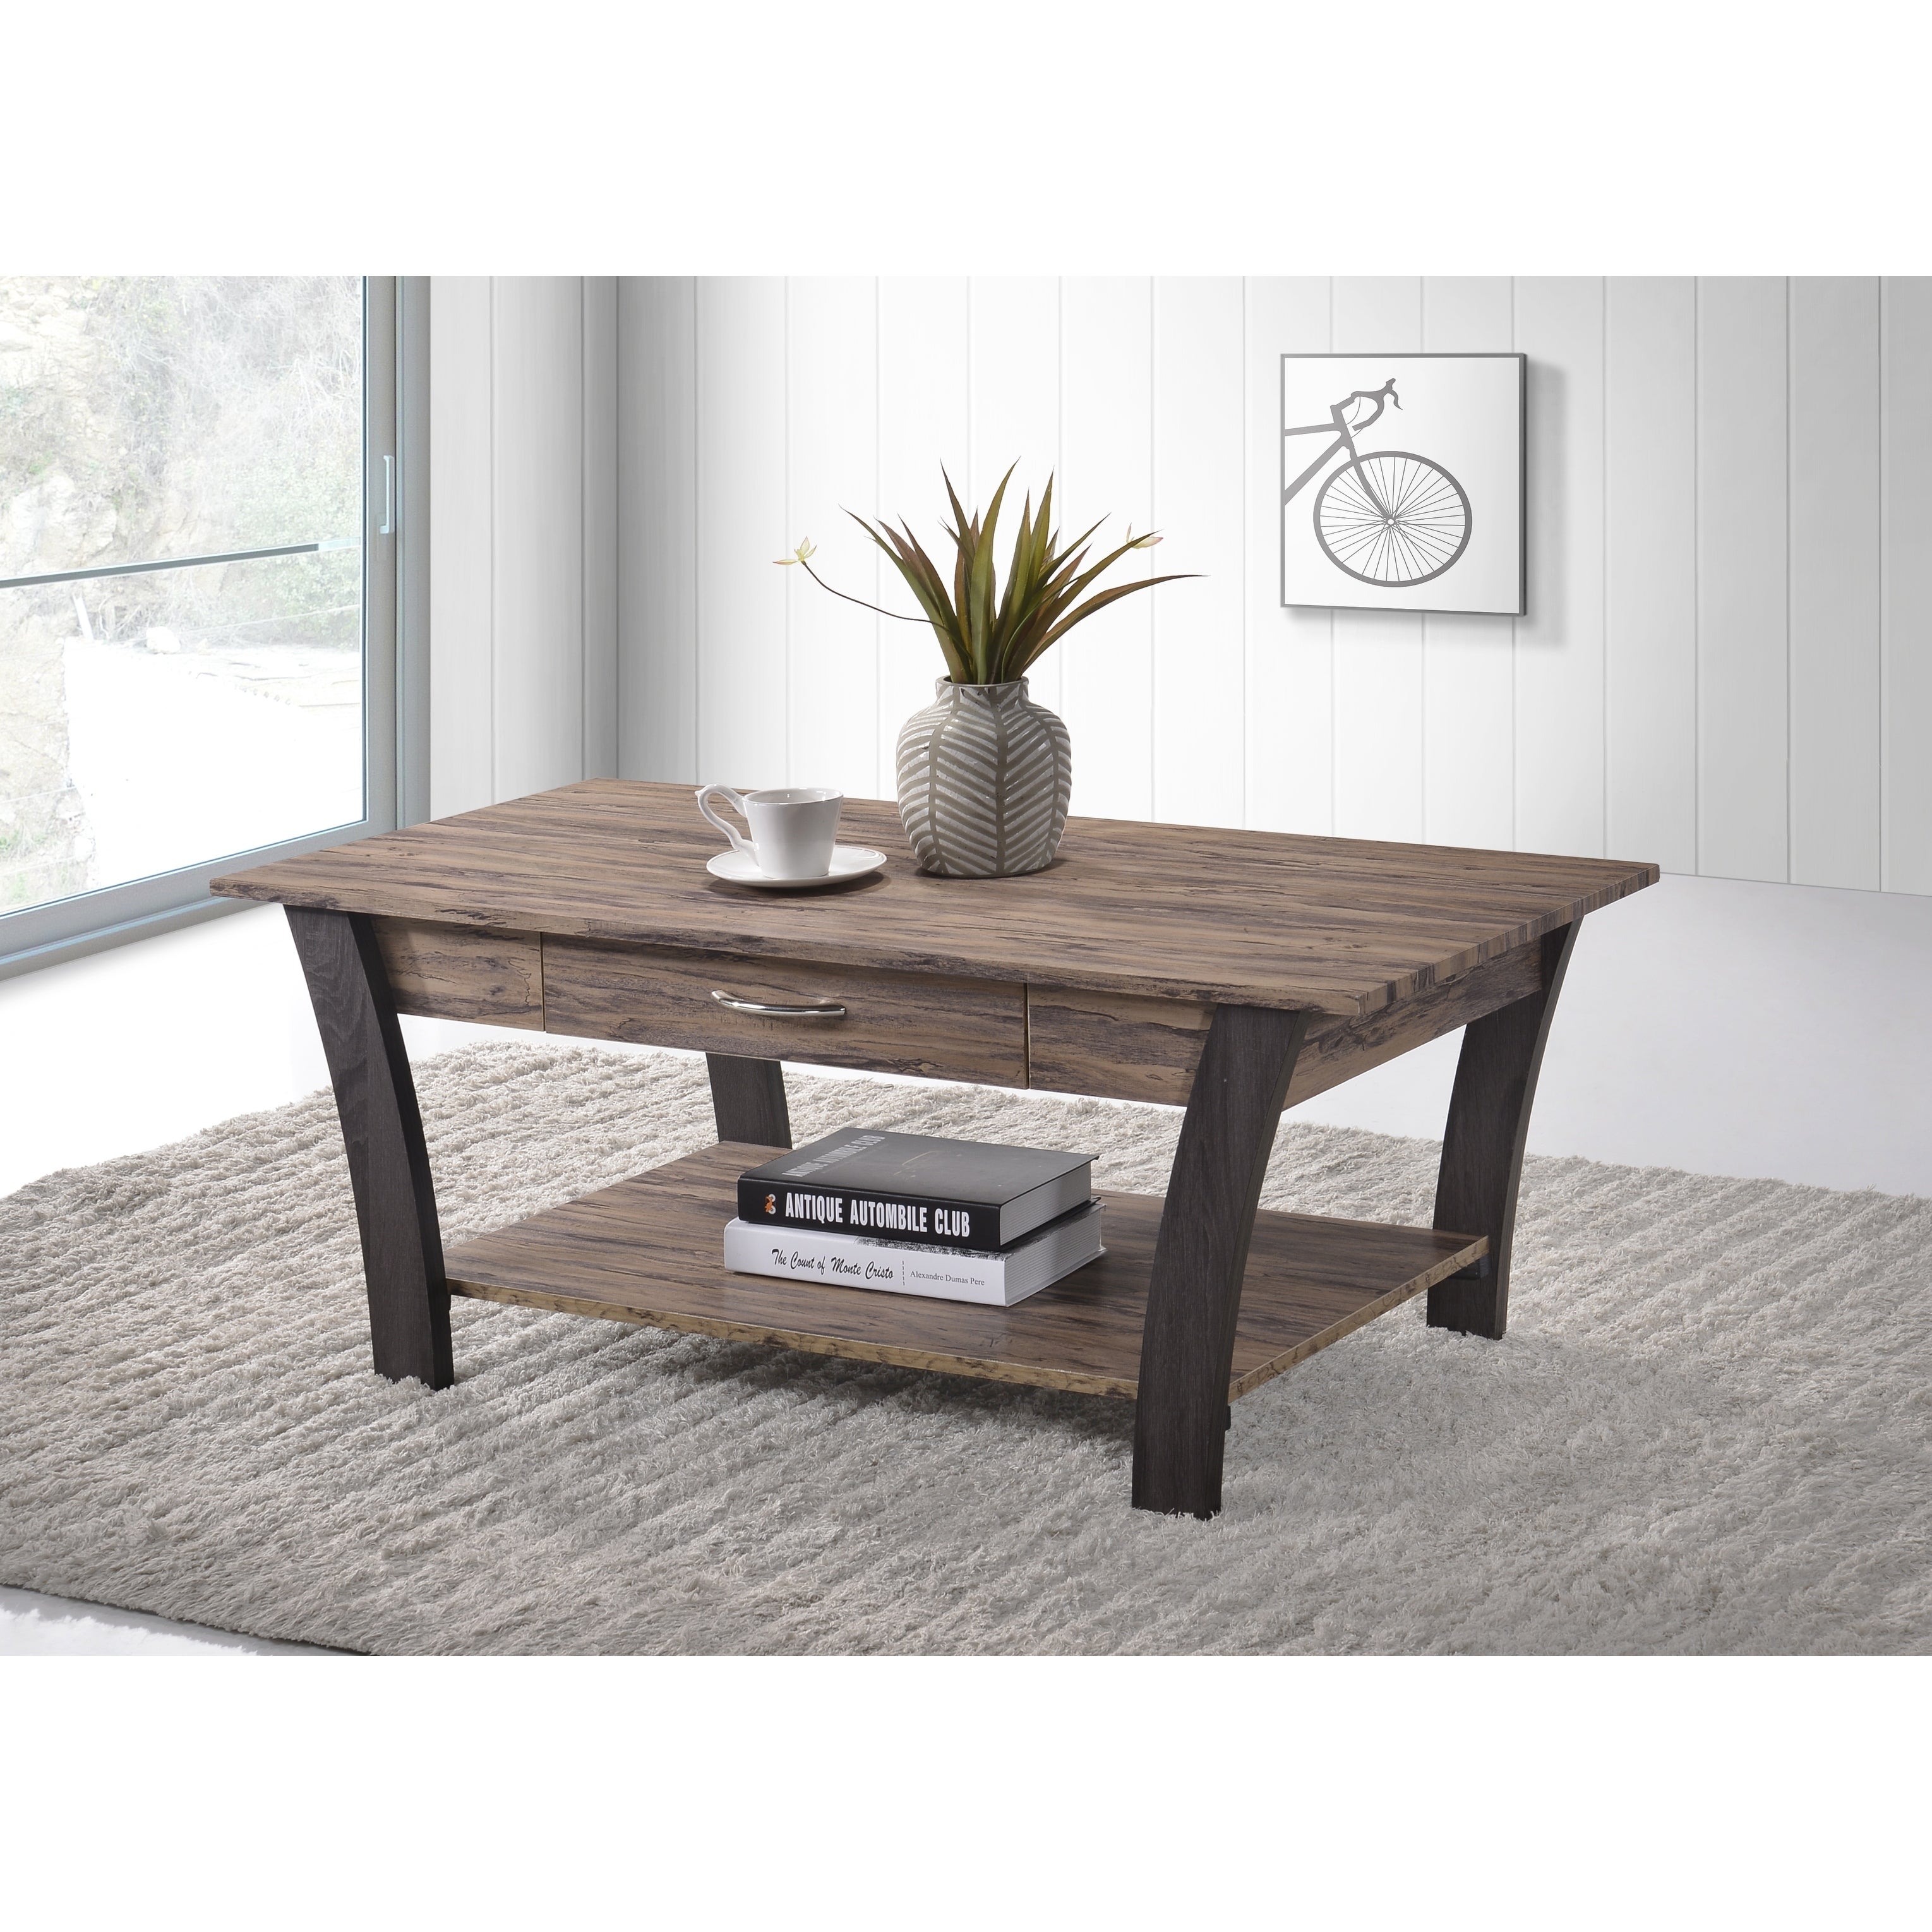 zag light brown dark gray finish coffee table with storage inches end tables affordable log furniture thomasville collectors cherry entertainment center high dining ethan allen